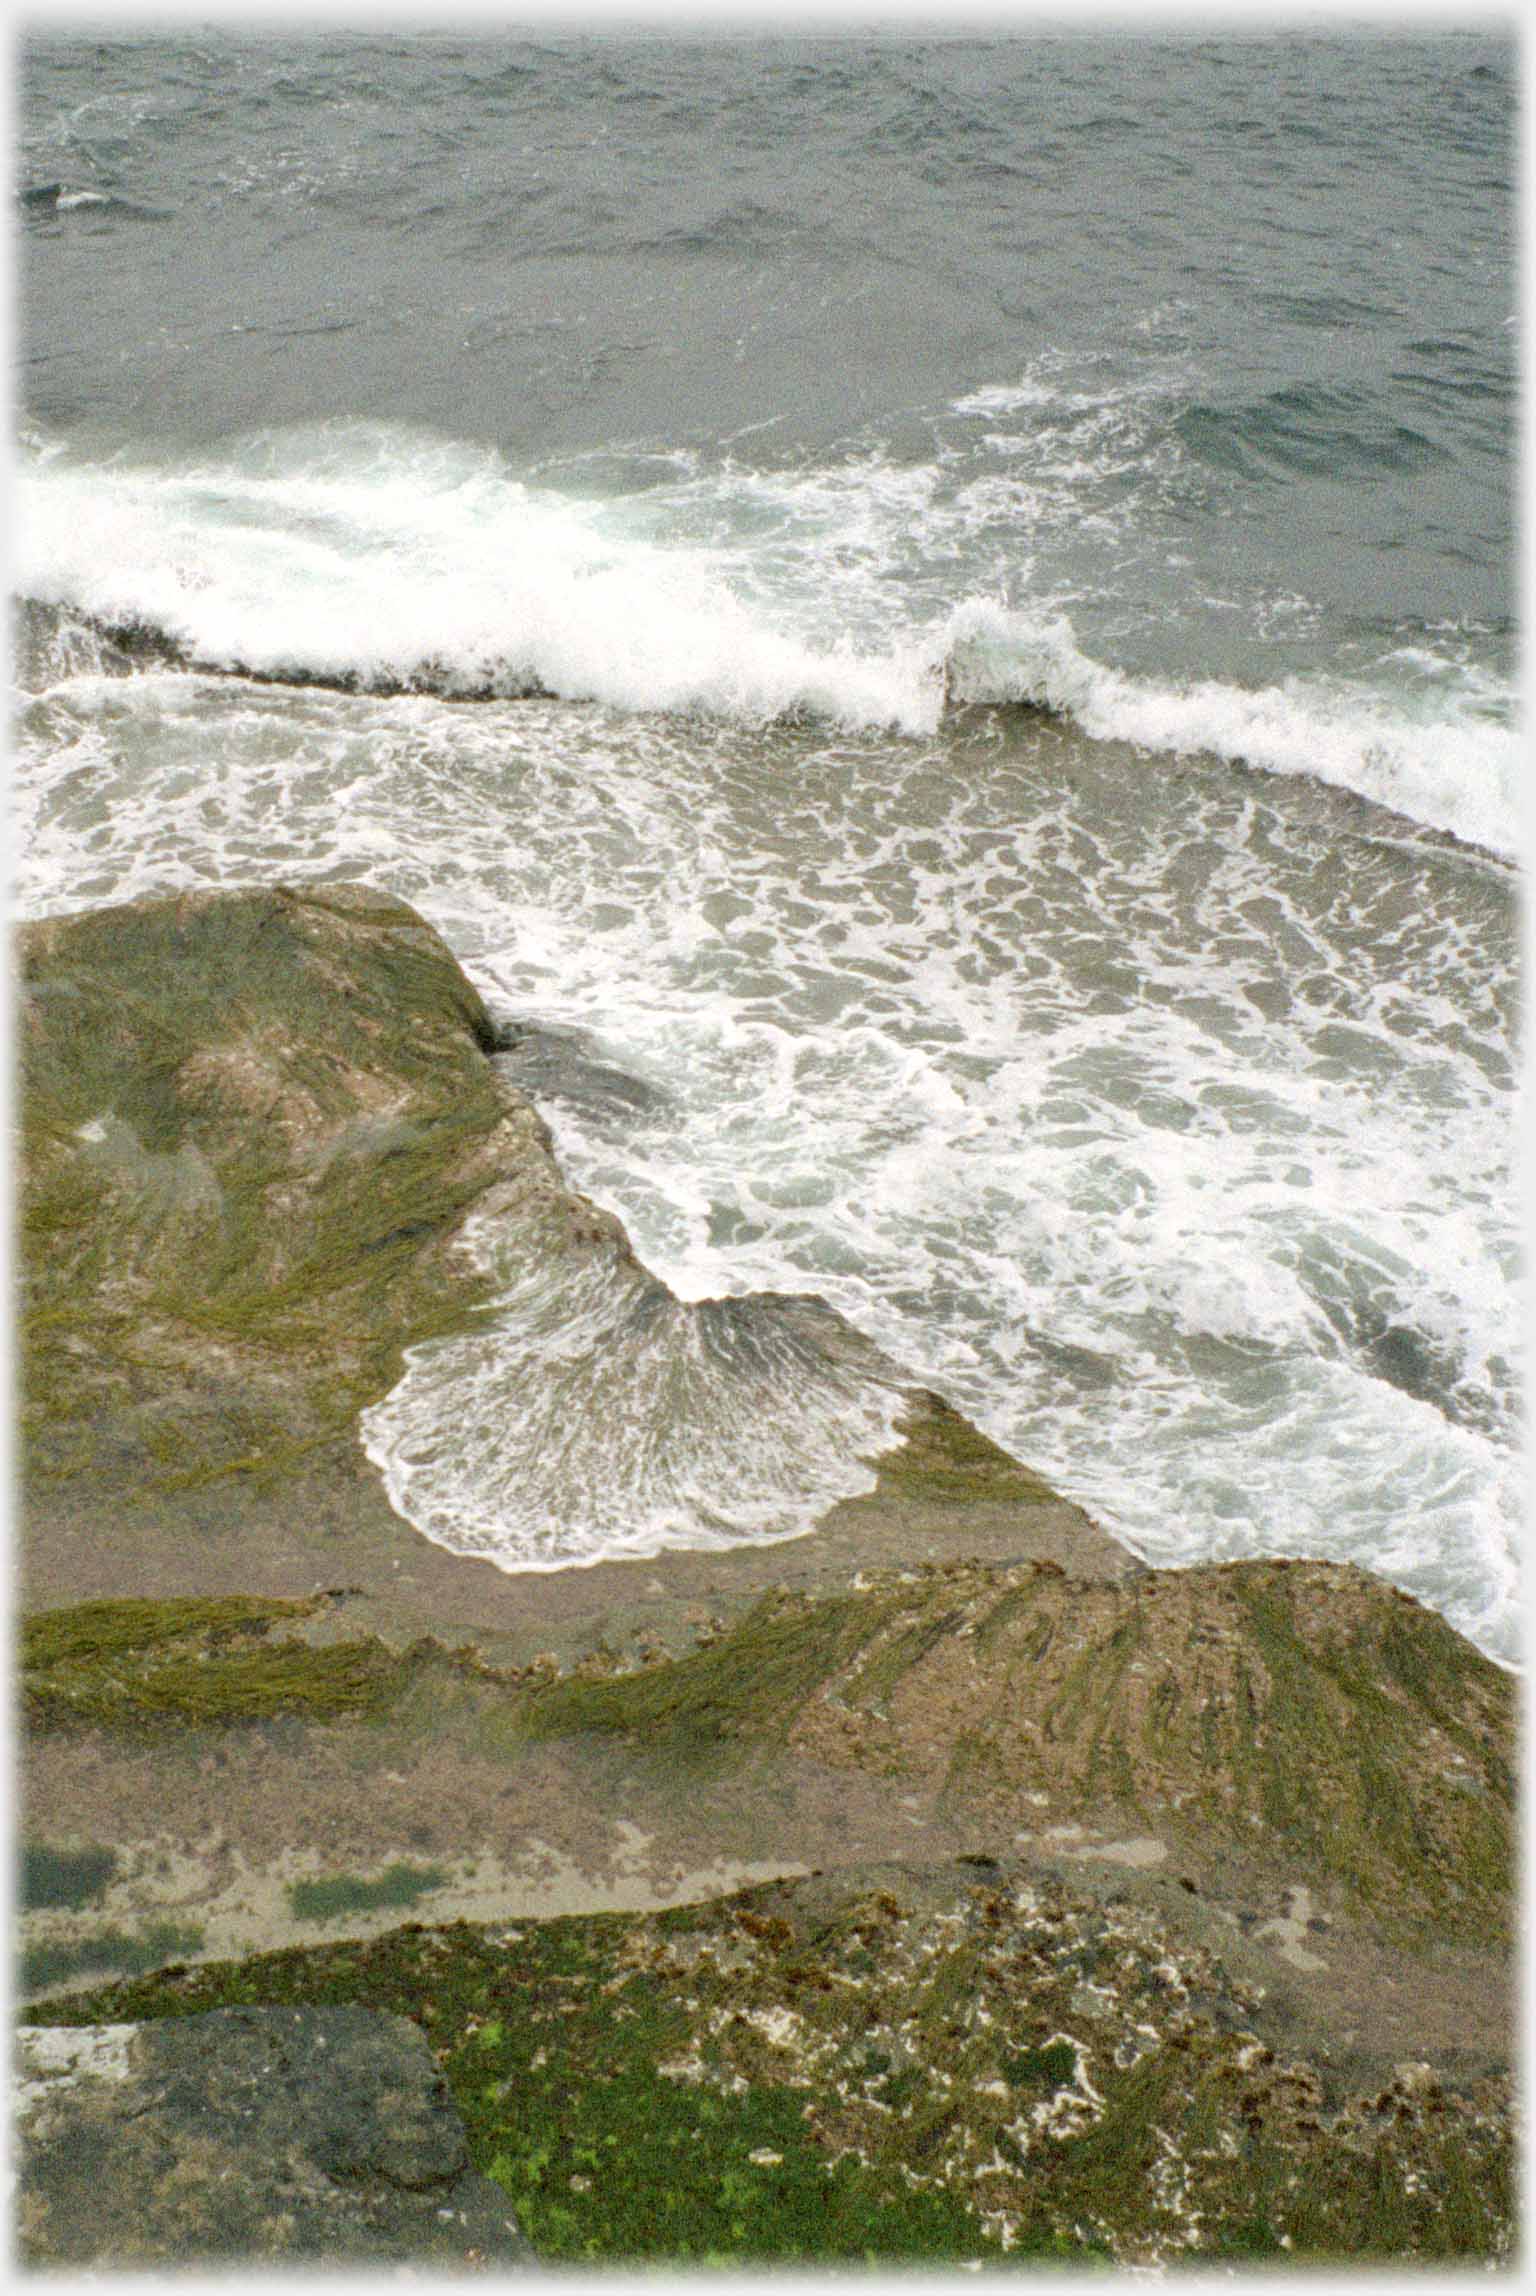 Looking down on breakers forming patterns of foam on the cliff foot rocks.